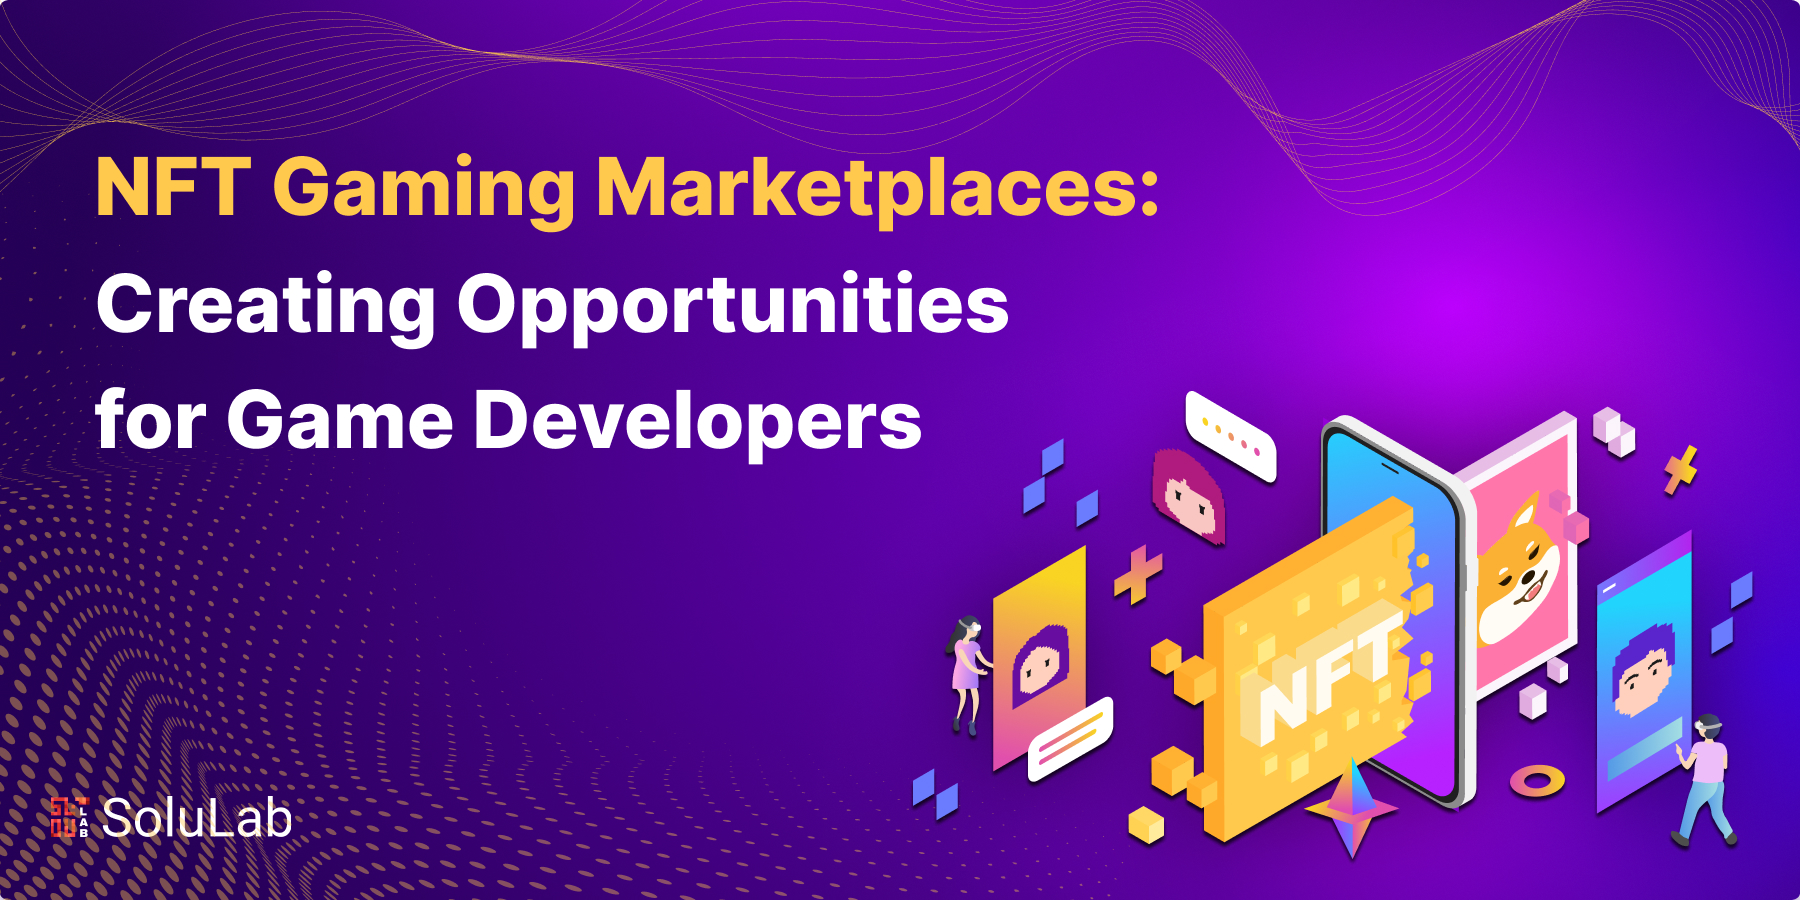 NFT Gaming Marketplaces: Creating Opportunities for Game Developers